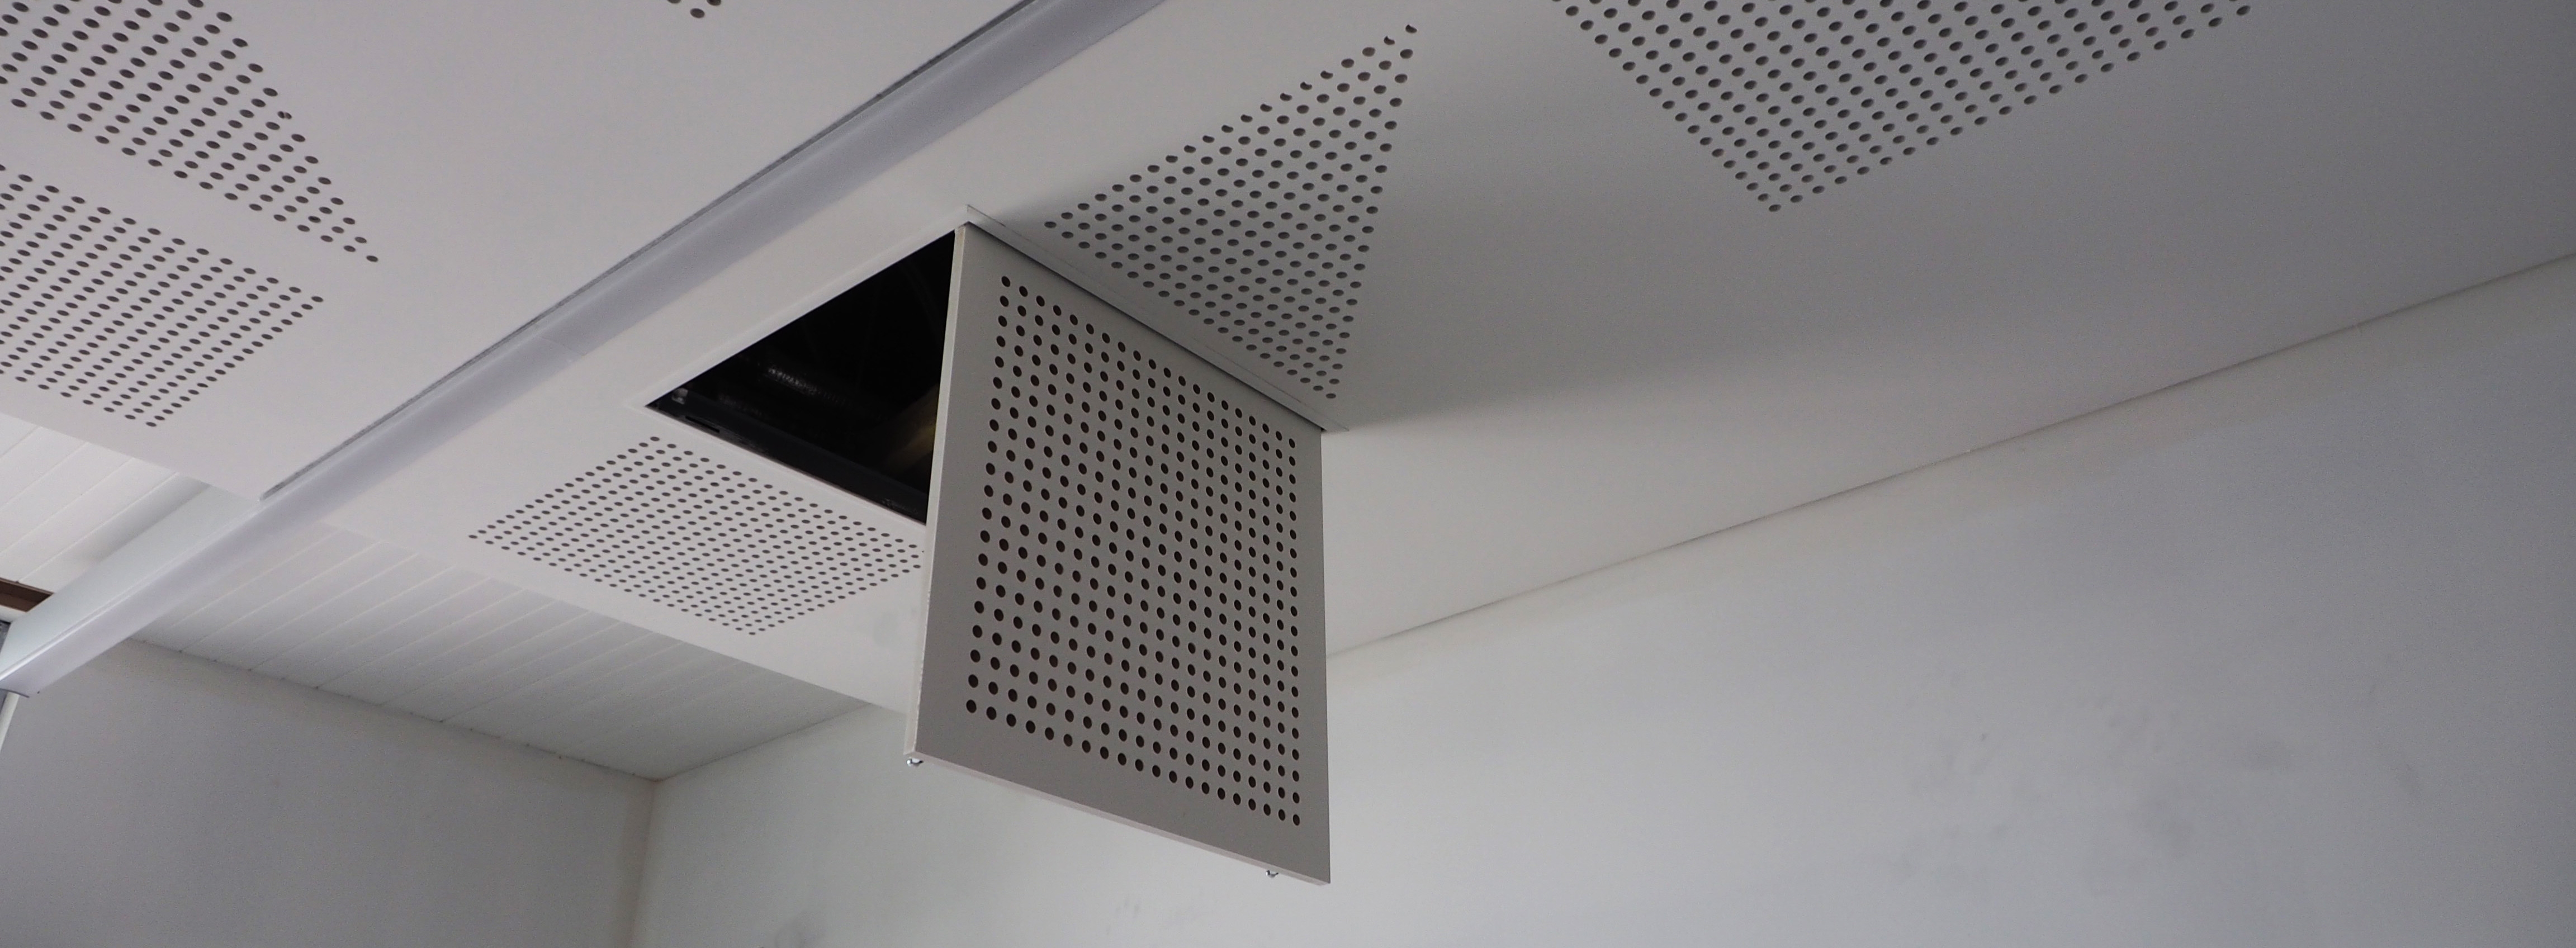 Permalink to Ceiling Tile Access Panel